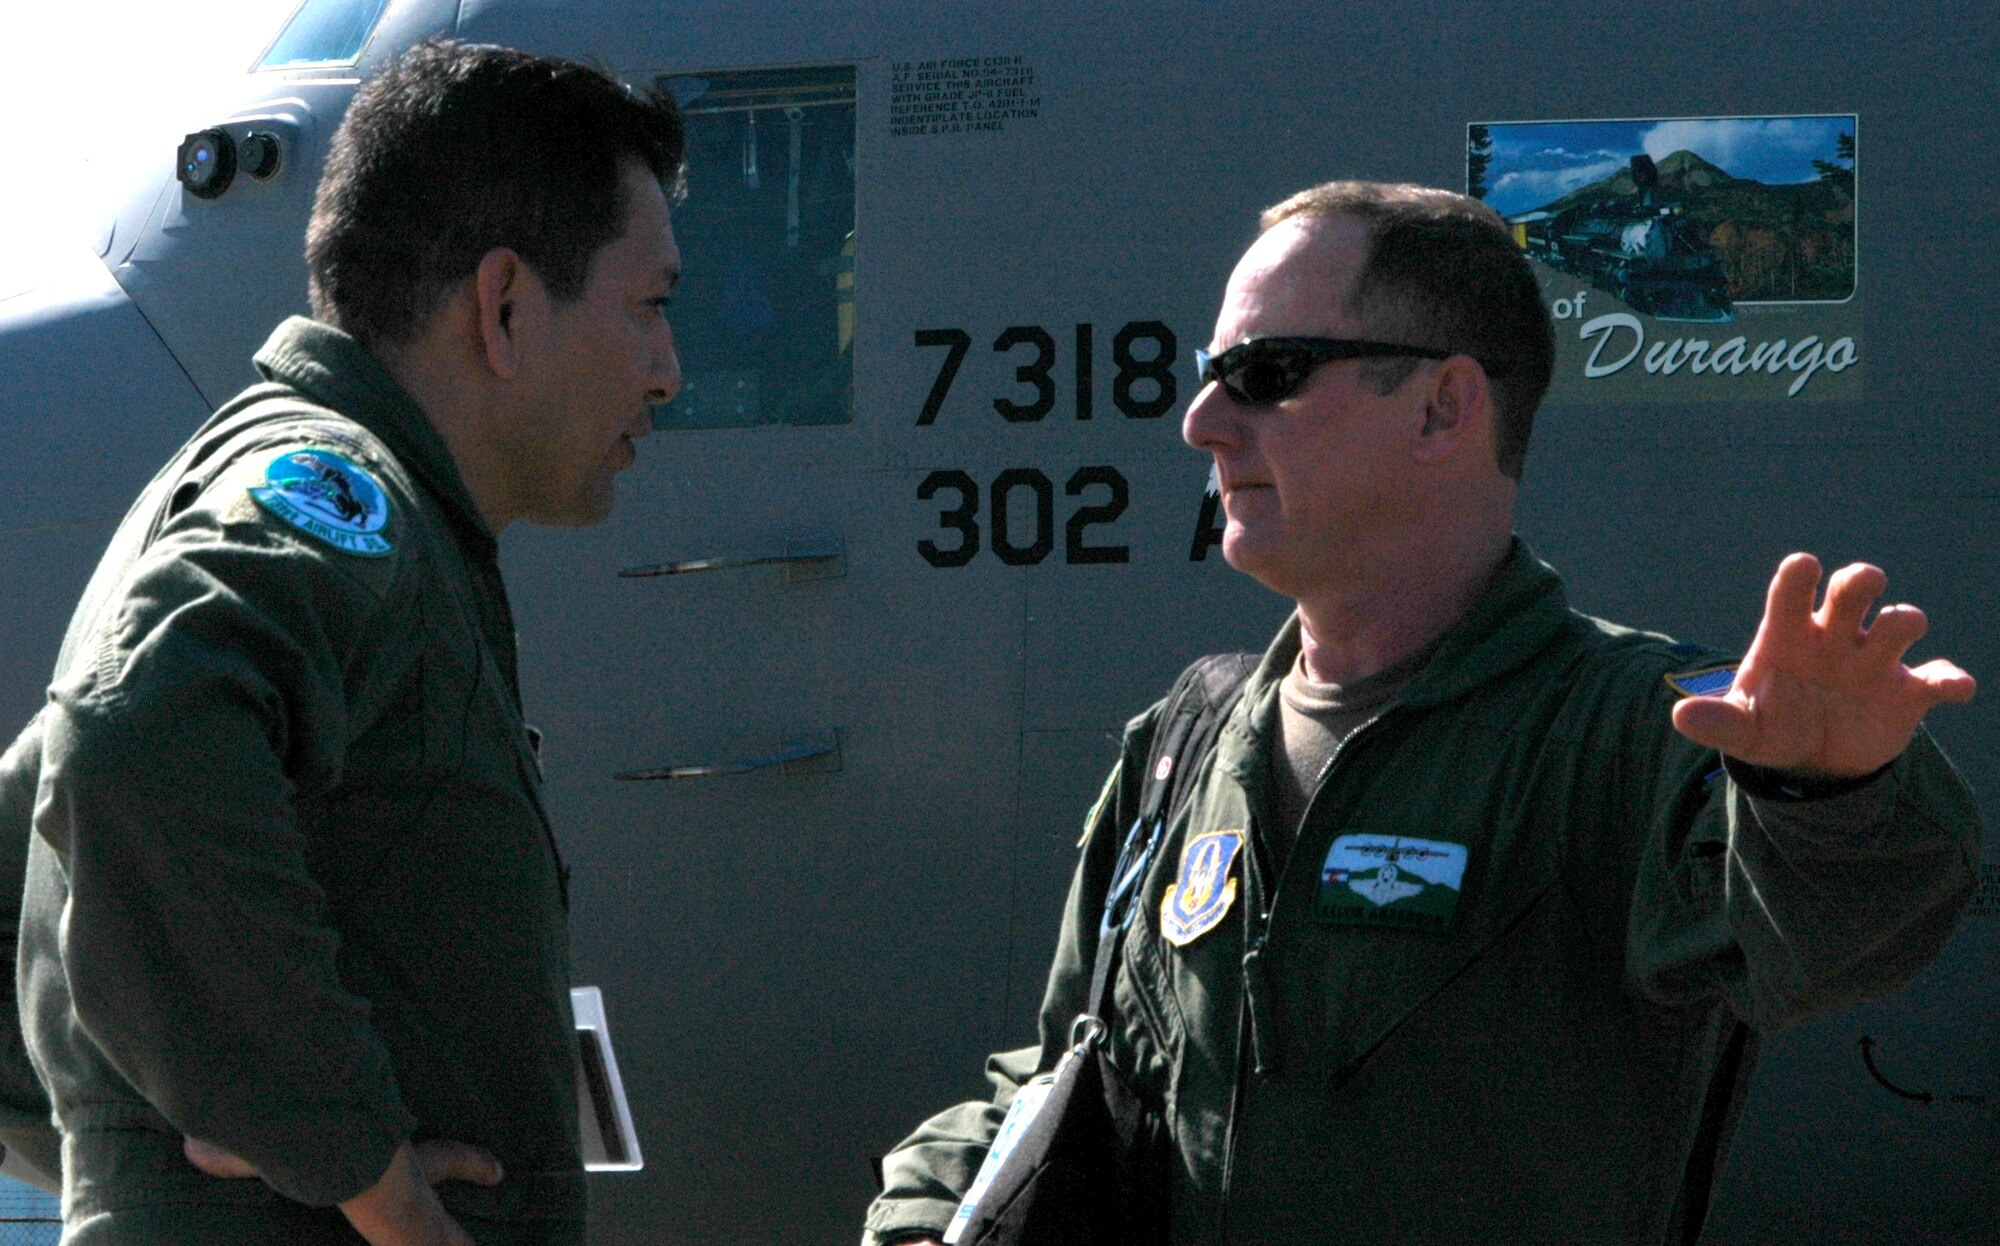 Lt. Col. Kelvin Anderson (right) coordinates with Col. Julio "Zorro" Lopez, 35th Expeditionary Airlift Squadron commander, after he and members of the Air Force Reserve's 302nd Airlift Wing arrived Jan. 23 at Muniz Air Base, Puerto Rico. Approximately 50 Airmen from the 302nd AW are deployed to the U.S. territory in support of Air Expeditionary Force Coronet Oak and its involvement with earthquake relief operations in Haiti. The Colorado-based AF Reserve Airmen are expected to be at Muniz Air Base for two weeks. Colonel Anderson is the mission commander for the deployed 302nd AW Airmen. (U.S. Air Force photo/Staff Sgt. Stephen J. Collier)
